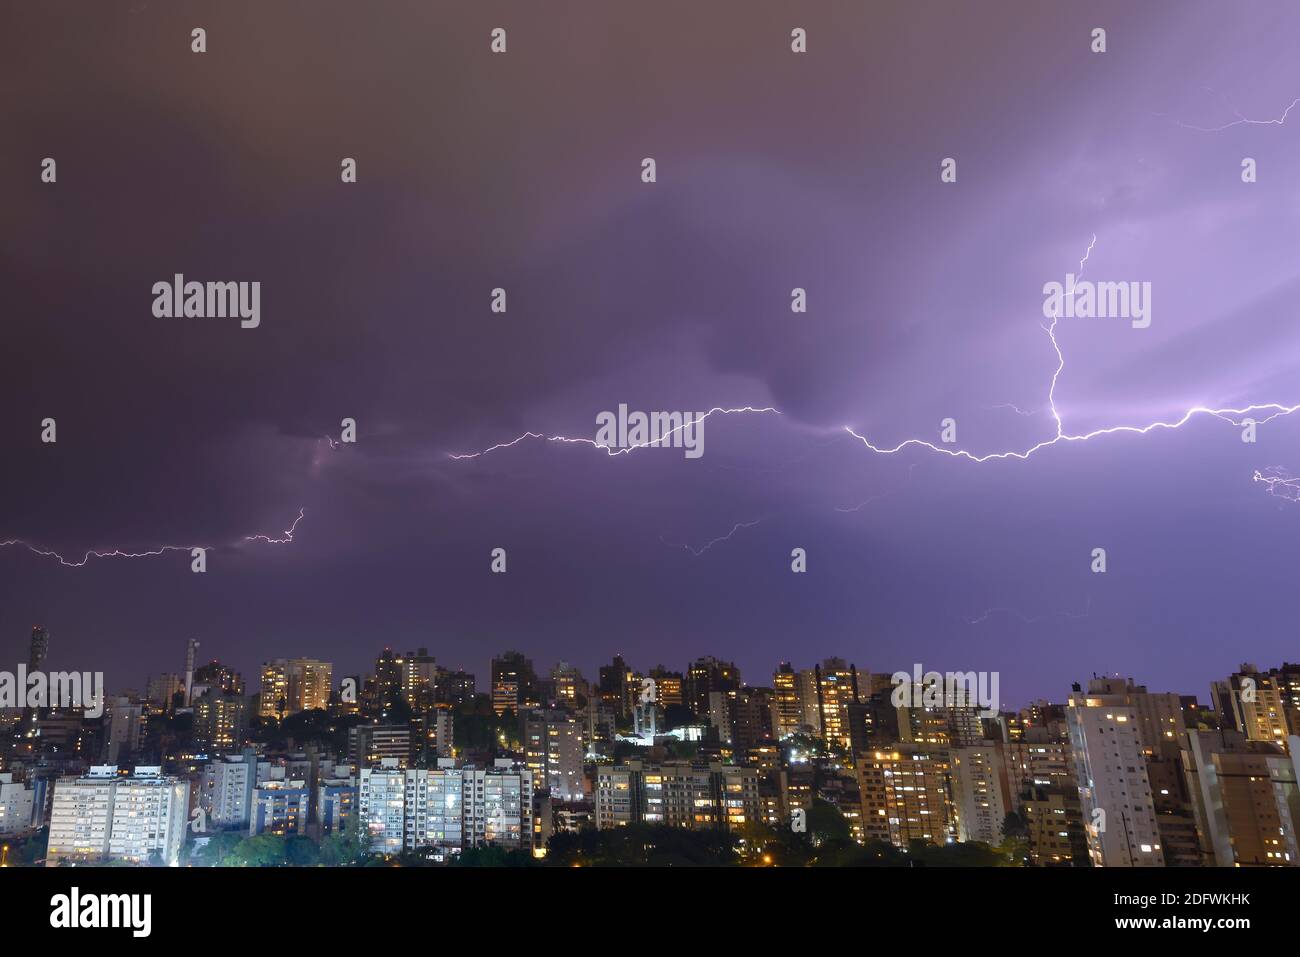 Skyline of Porto Alegre with stormy sky at night. Forked lightning spreading in the sky above residential buildings. Bad weather in South of Brazil. Stock Photo